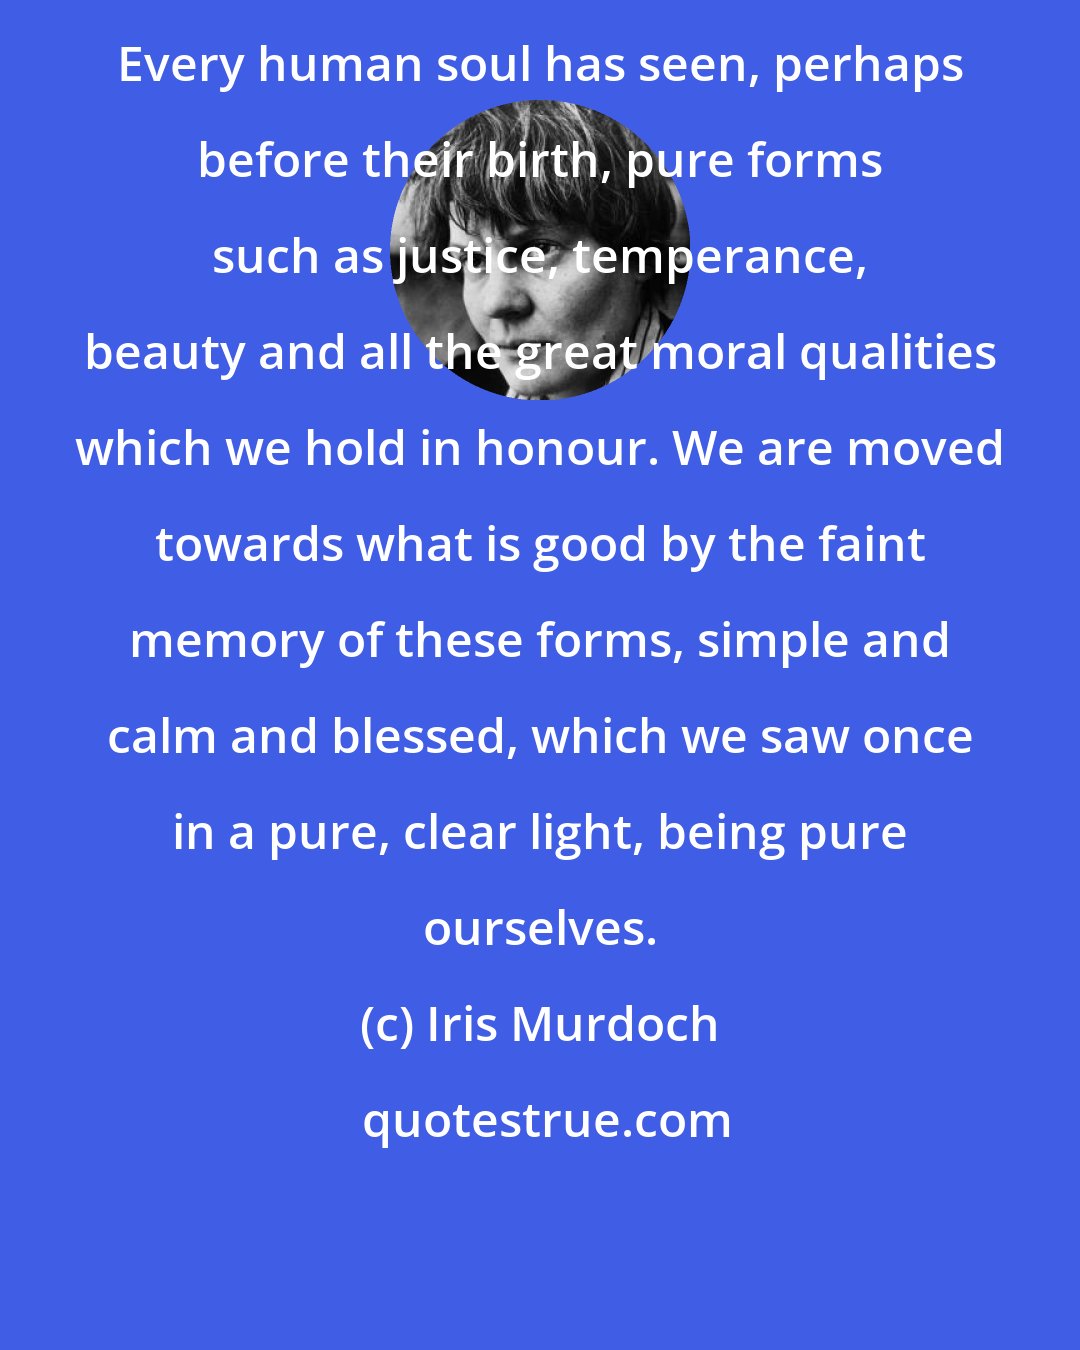 Iris Murdoch: Every human soul has seen, perhaps before their birth, pure forms such as justice, temperance, beauty and all the great moral qualities which we hold in honour. We are moved towards what is good by the faint memory of these forms, simple and calm and blessed, which we saw once in a pure, clear light, being pure ourselves.